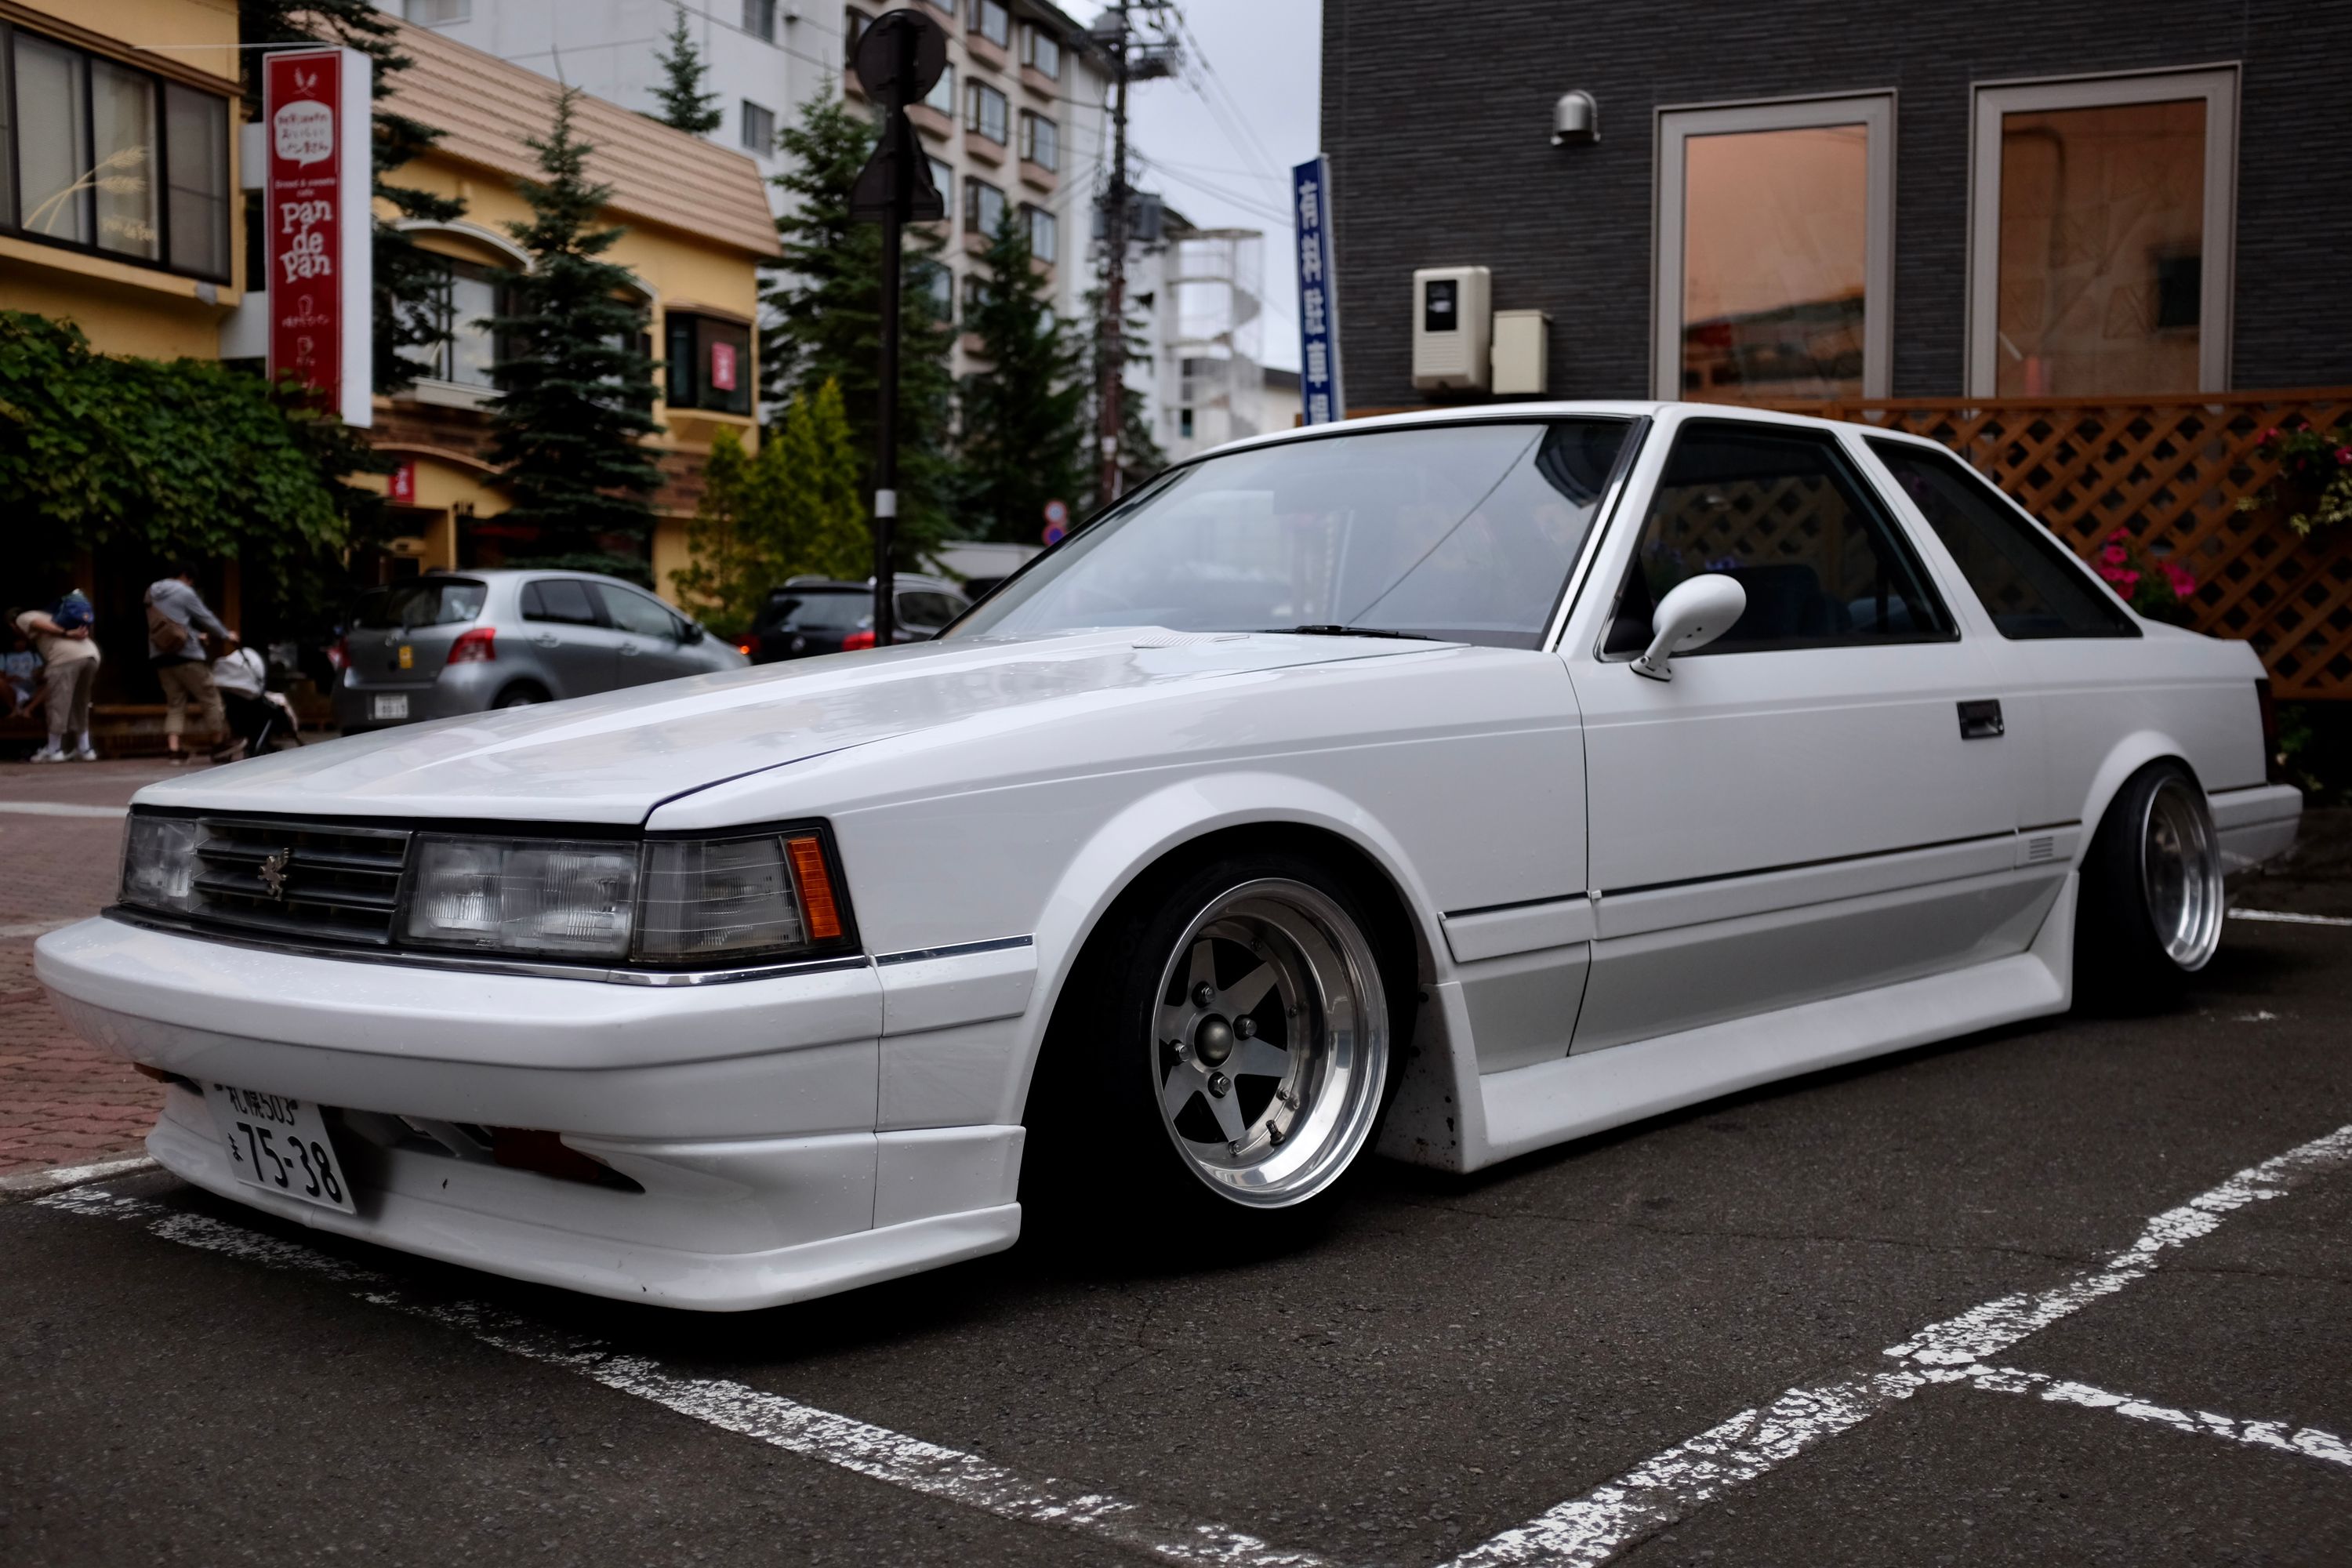 An extremely low-slung angular white Japanese sports car in a parking lot.